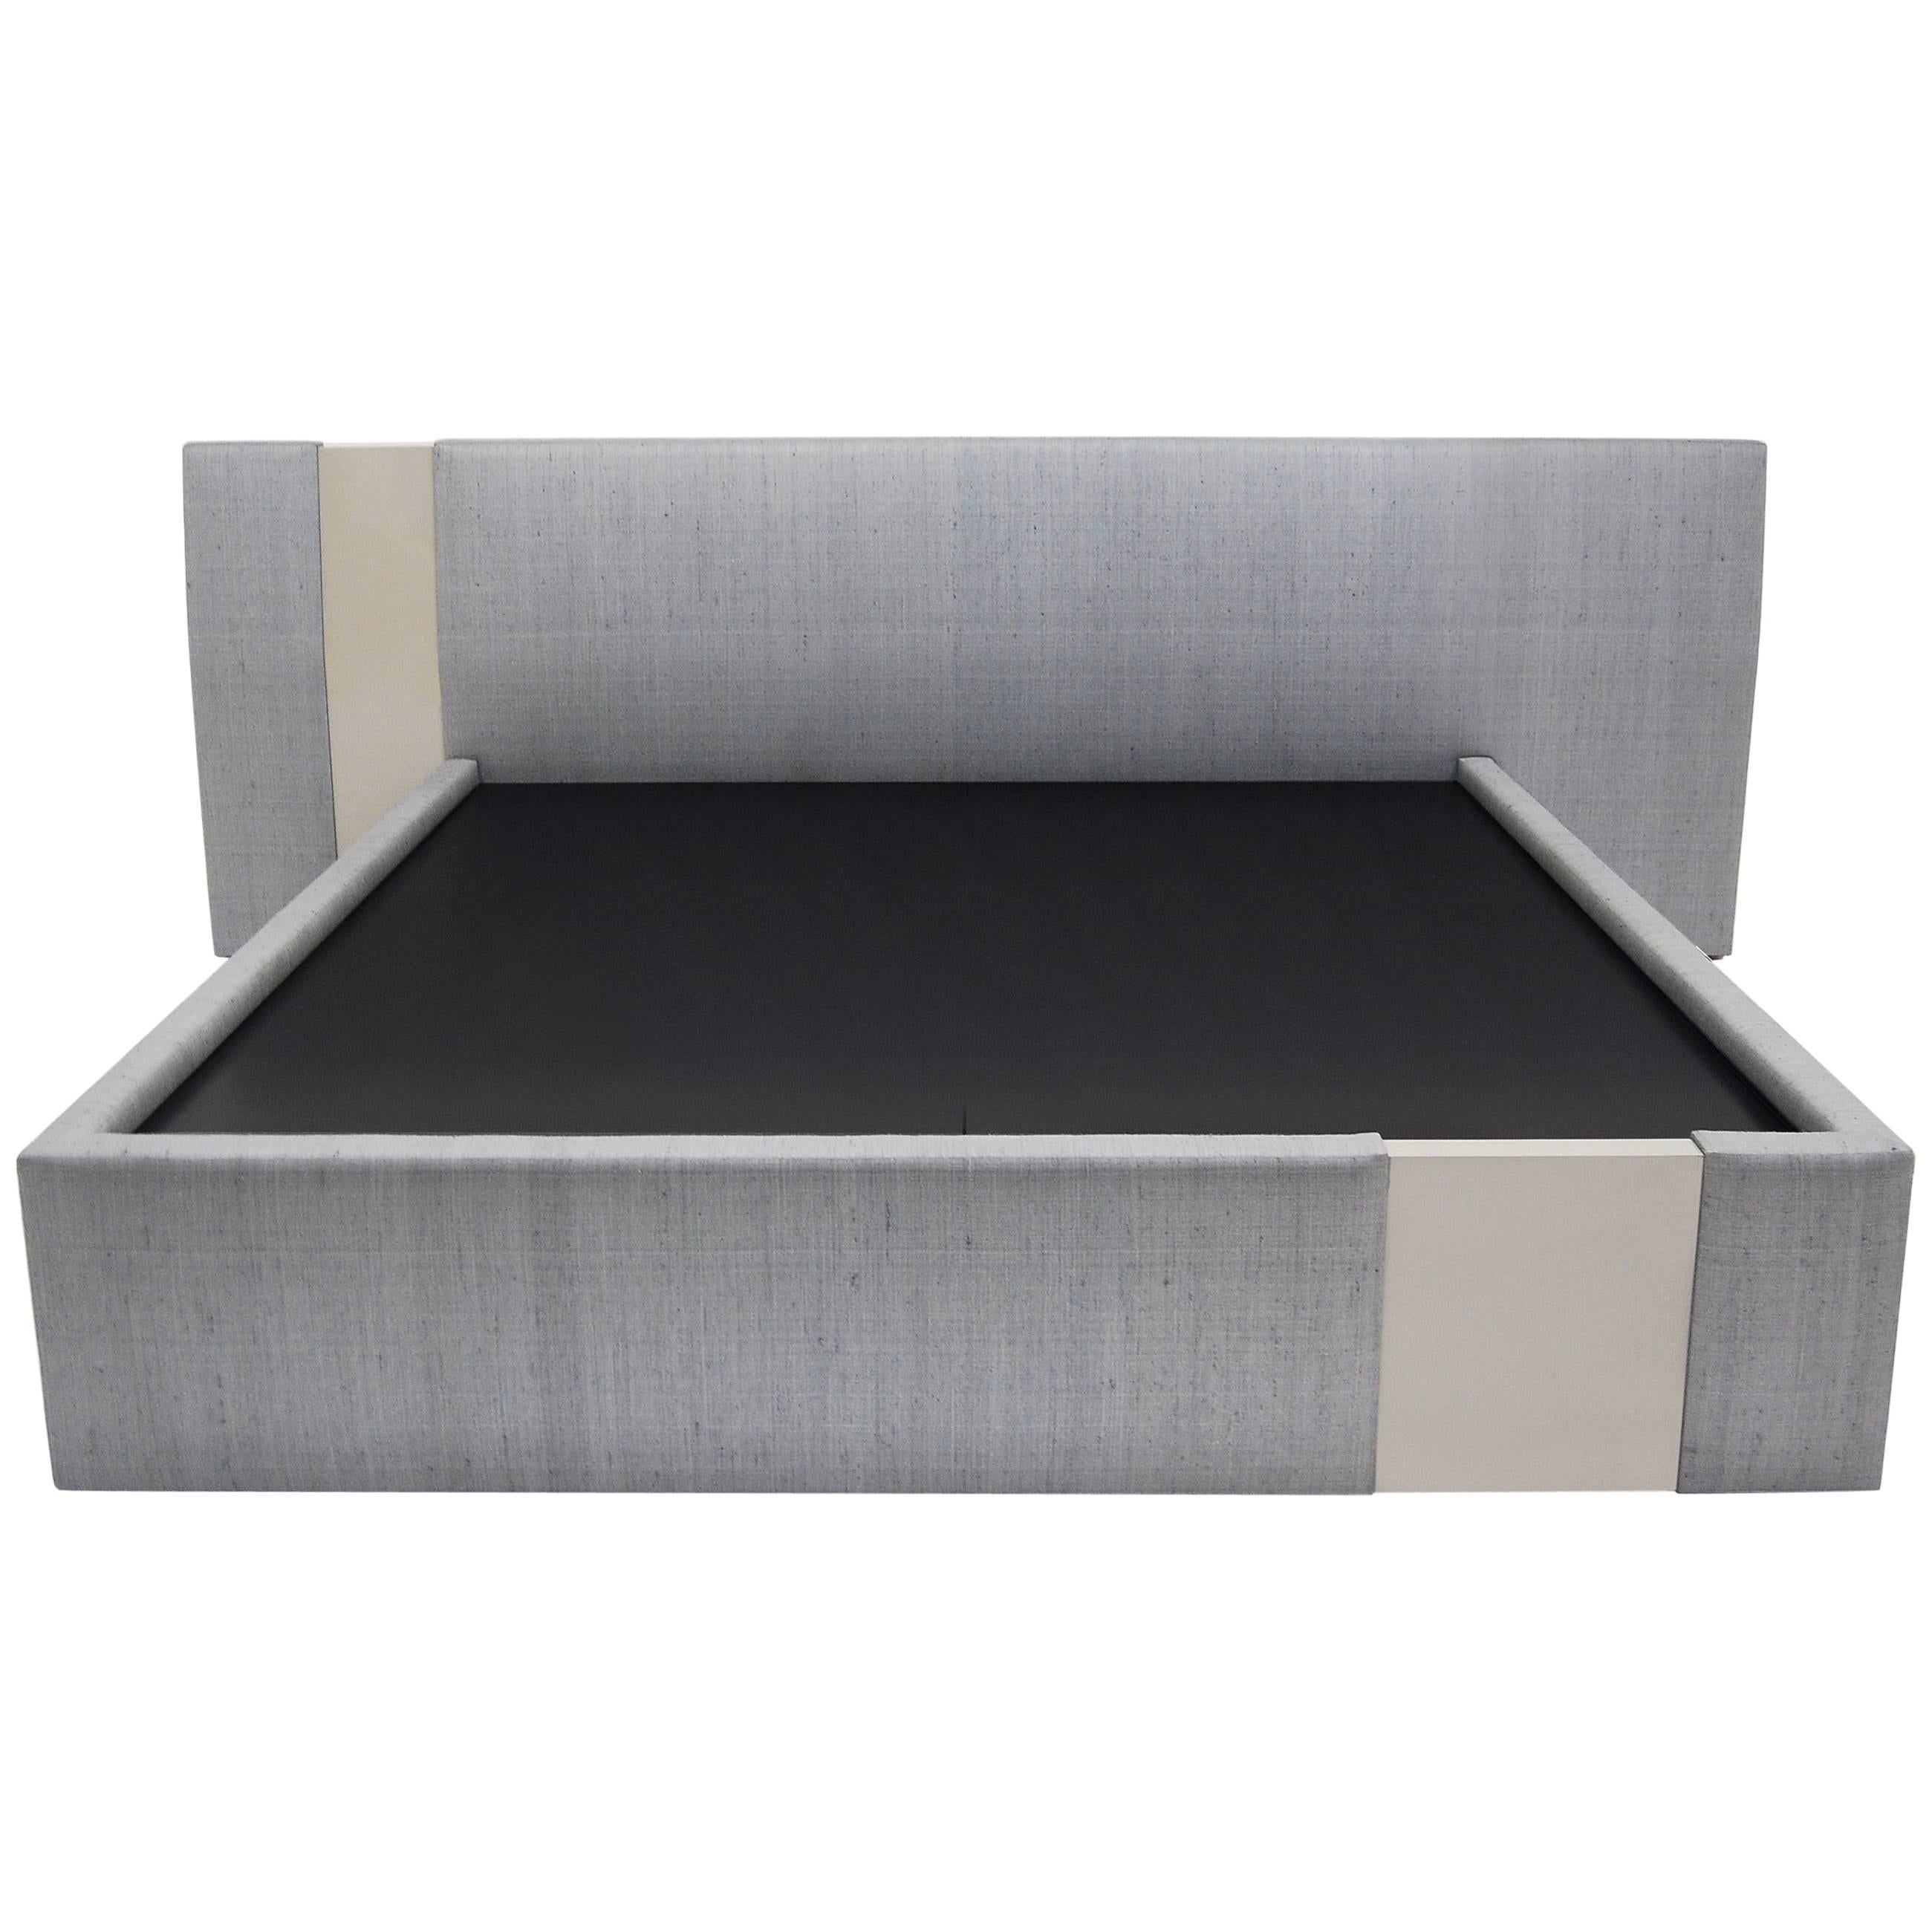 Nocturnal Bed Upholstered frame with two lacquer cuts 